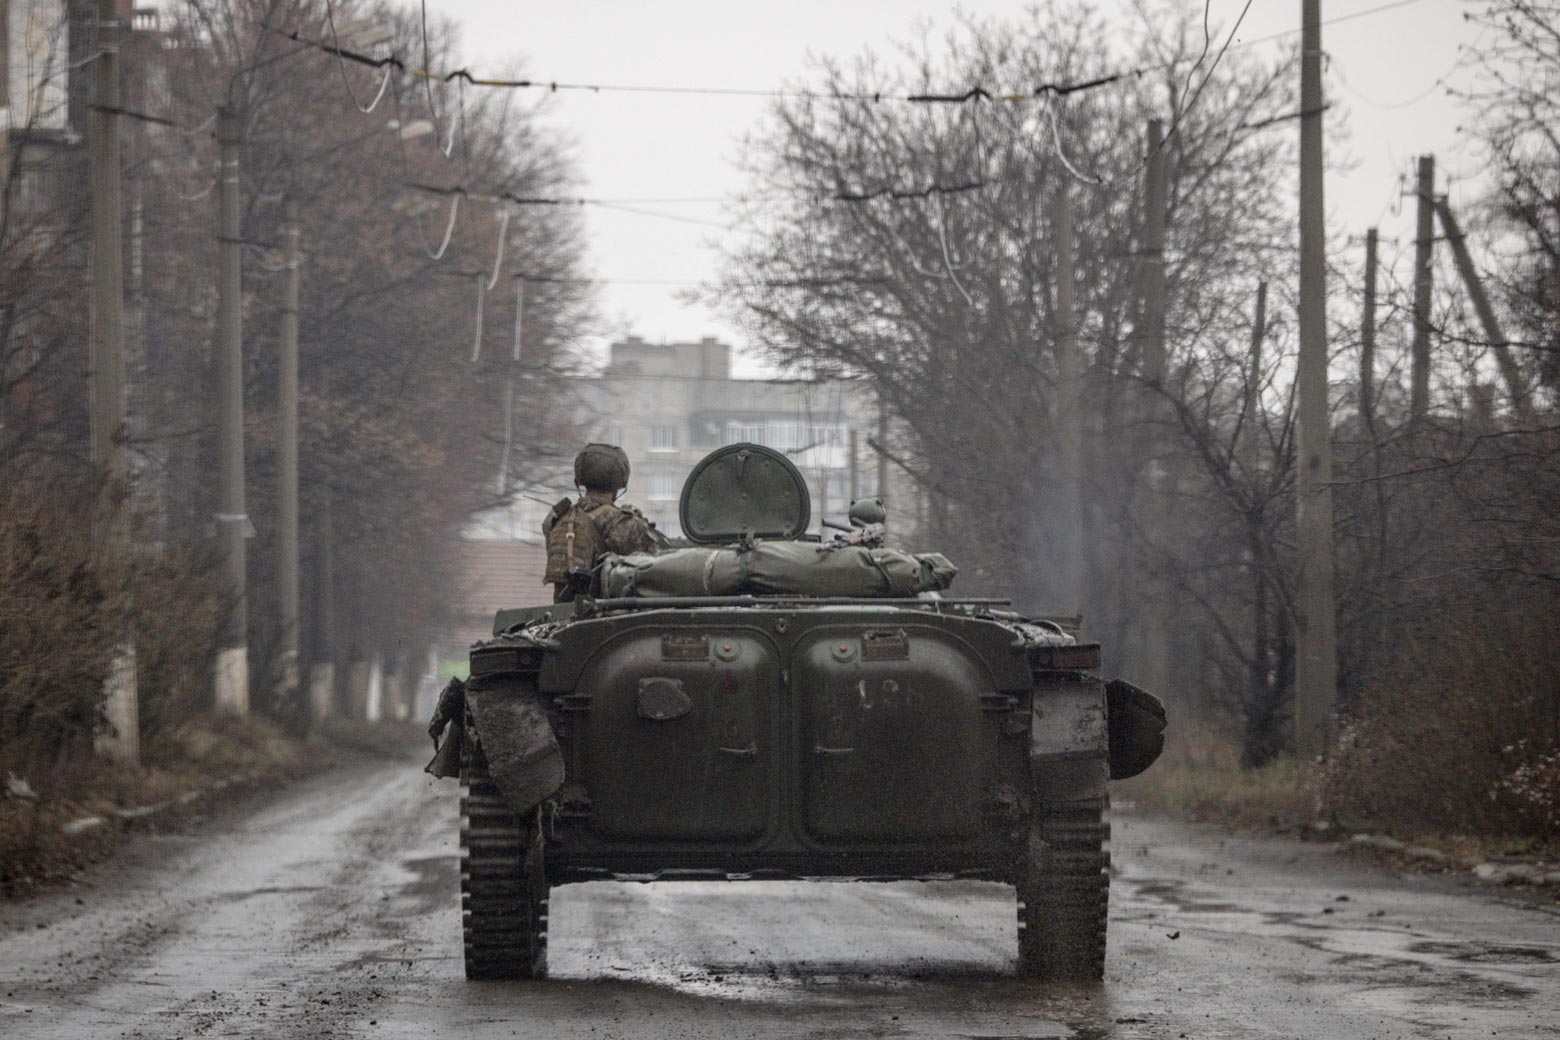 A soldier in an infantry fighting vehicle drives down a tree-lined street.